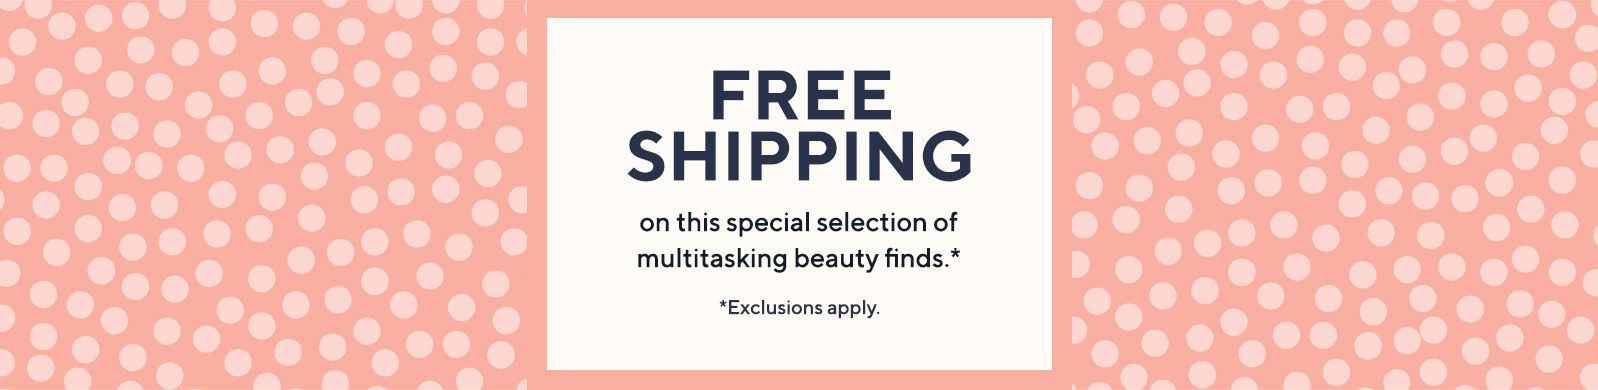 Free Shipping on this special selection of multitasking beauty finds.*   *Exclusions apply.